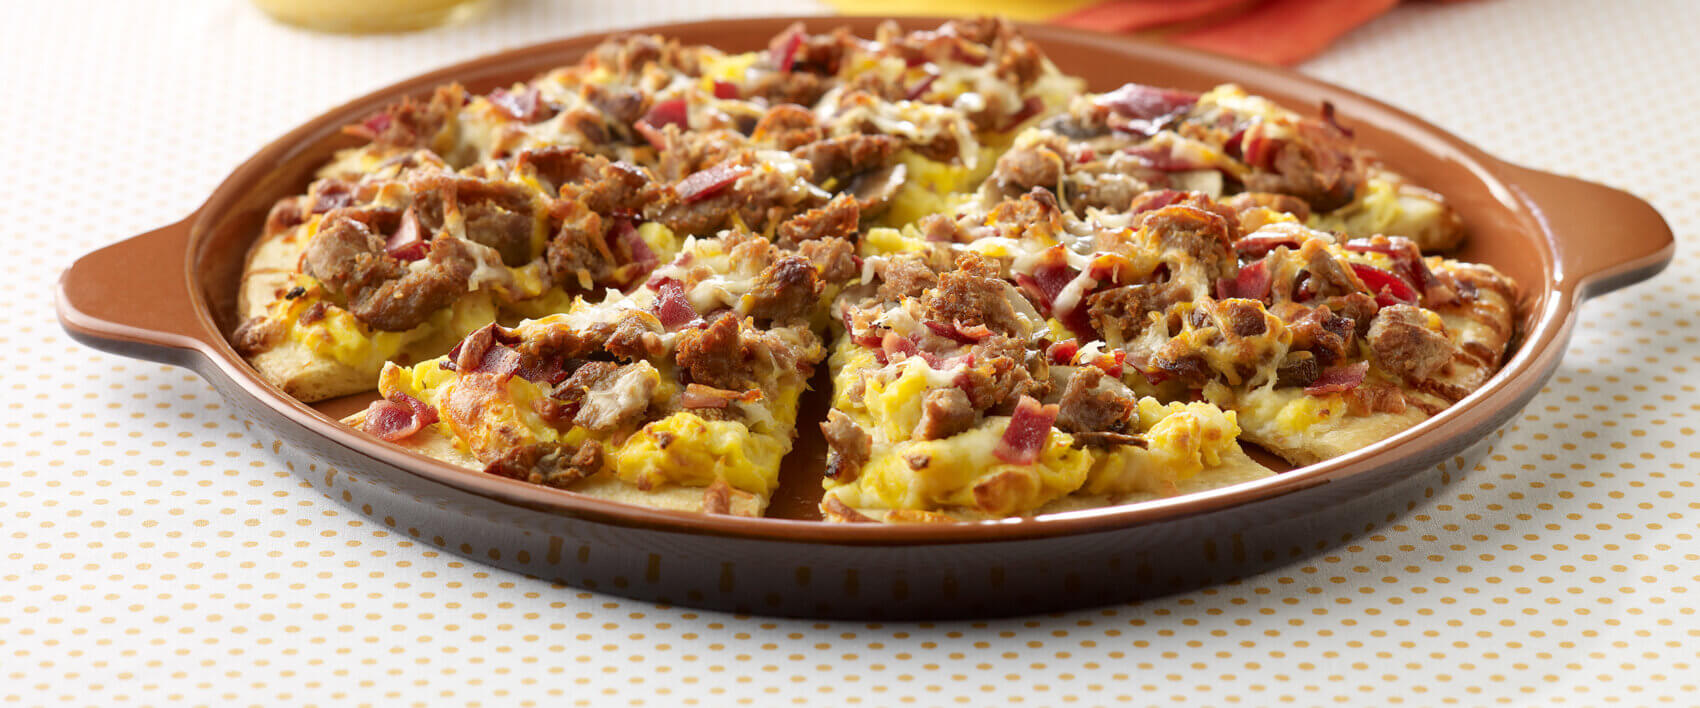 Turkey Bacon And Sausage Breakfast Pizza Hormel Foods